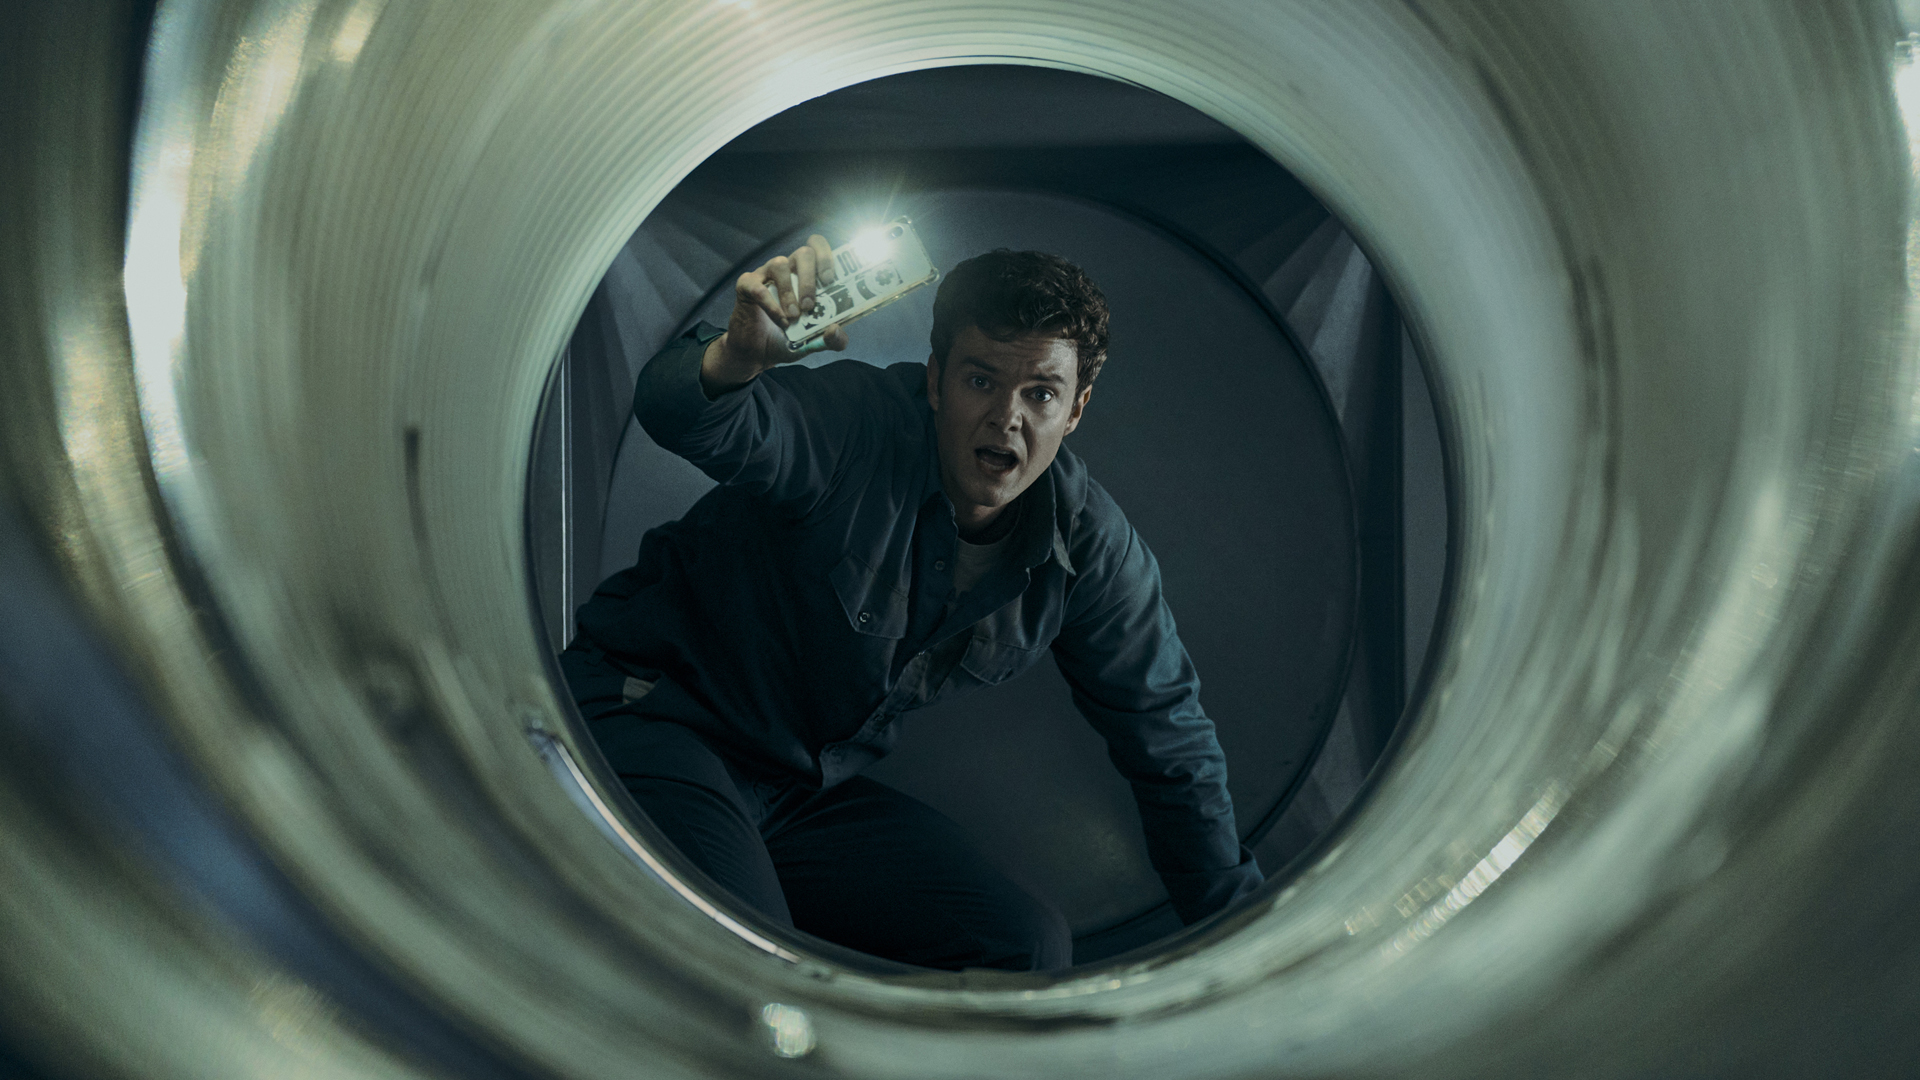 Hughie looks shocked as he crawls through a vent duct in The Boys season 4